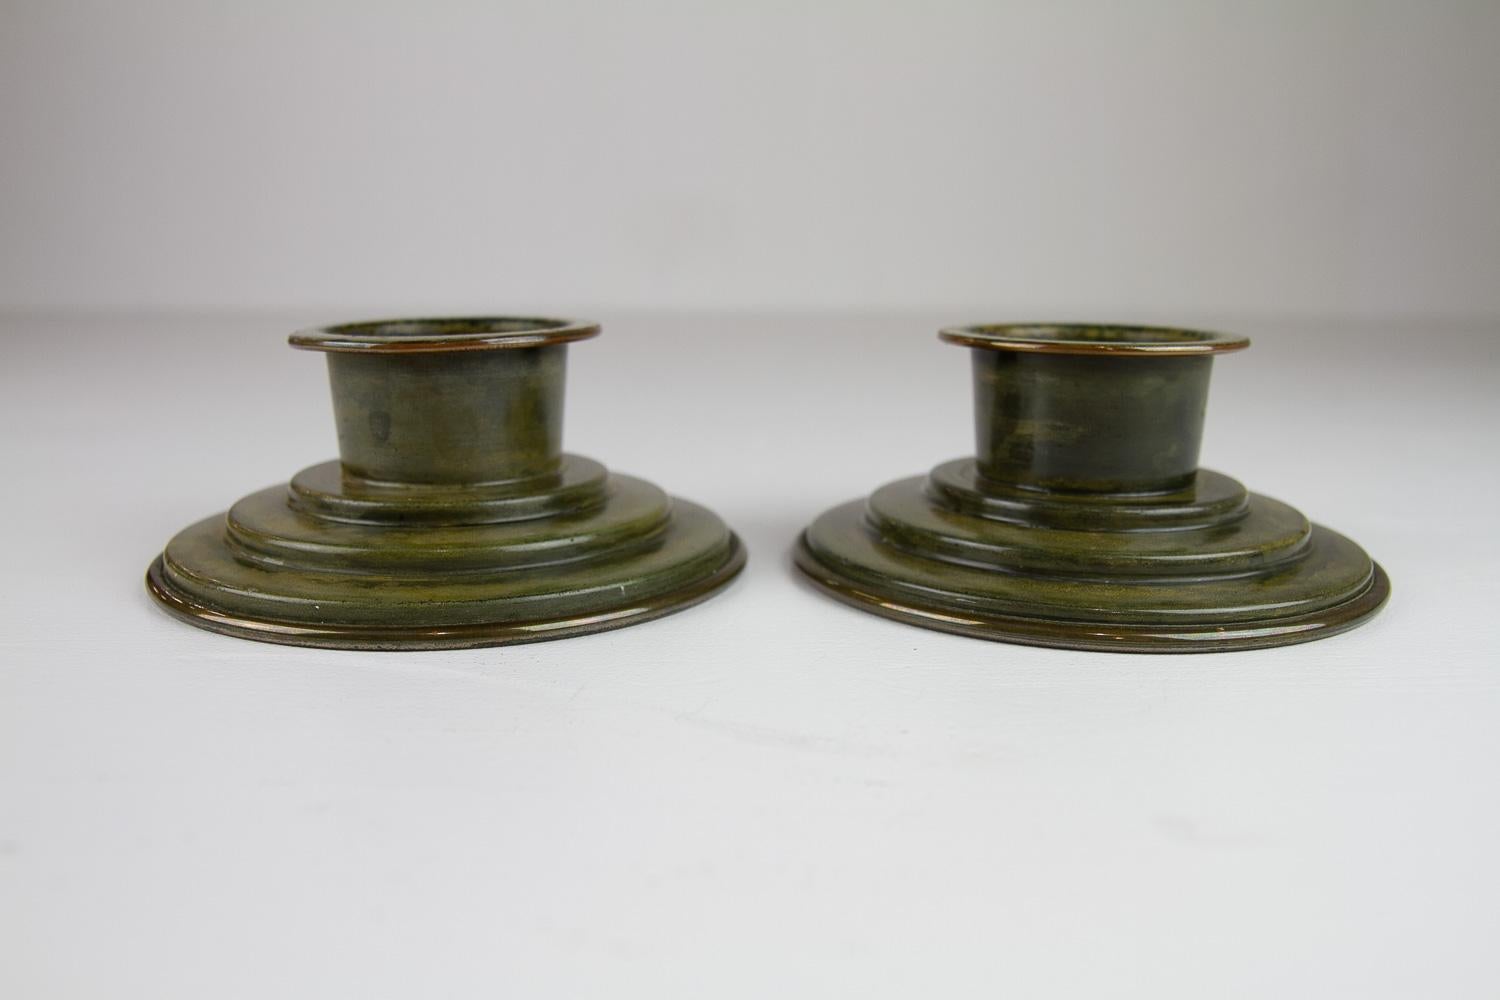 Danish Art Deco Bronze Candleholders by HF Bronce, 1930s.

Pair of patinated bronze candle holders made by Danish manufacturer HF Bronce, Denmark in the 1930s.
Made from thin bronze plate.
Candle diameter: 45 millimeters.

Patina consistent with age